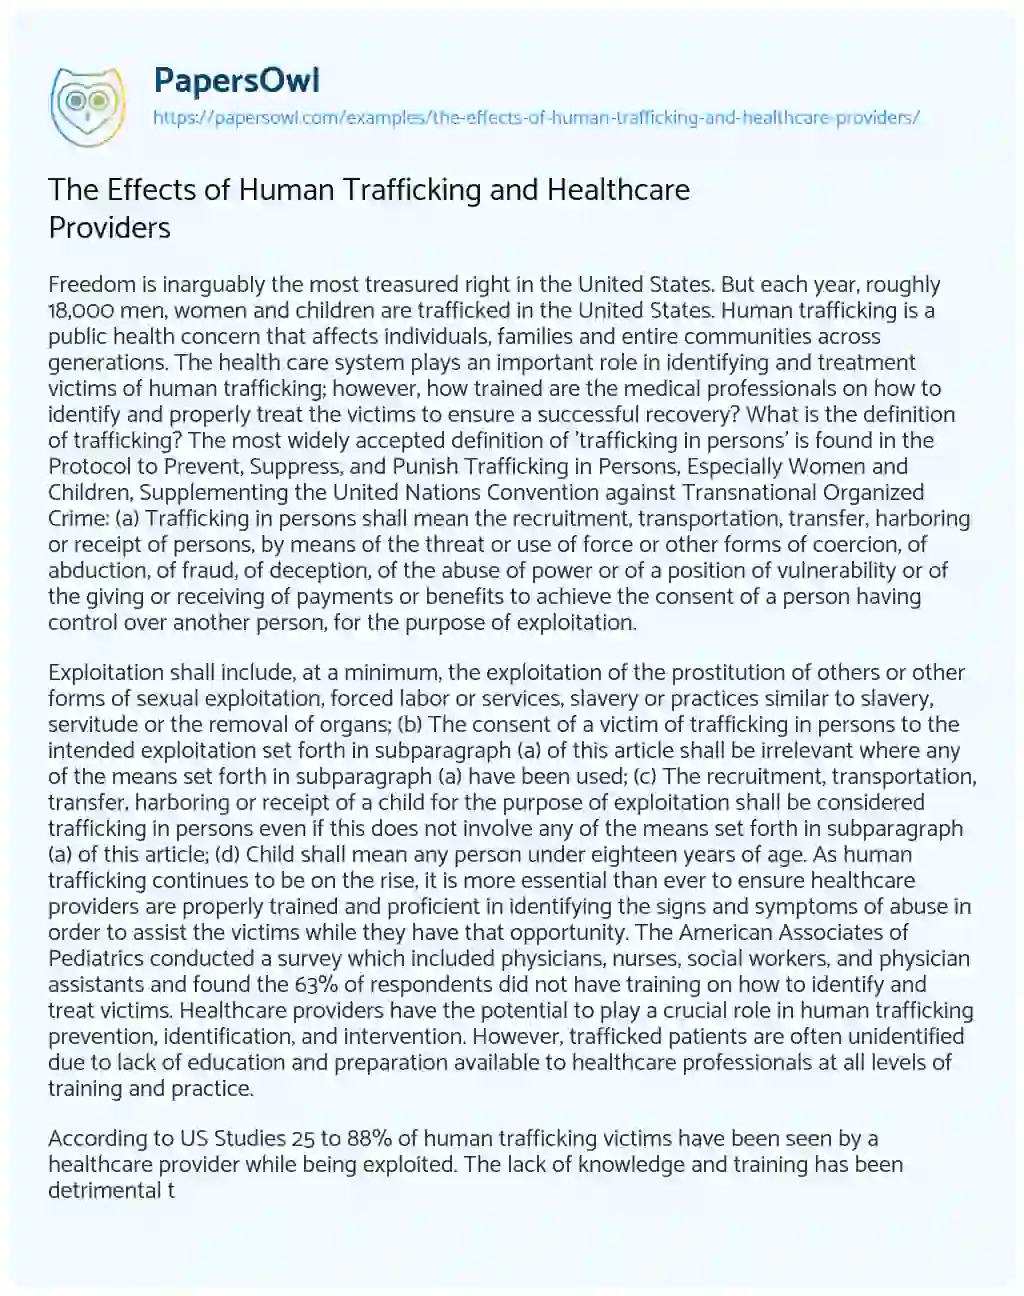 Essay on The Effects of Human Trafficking and Healthcare Providers